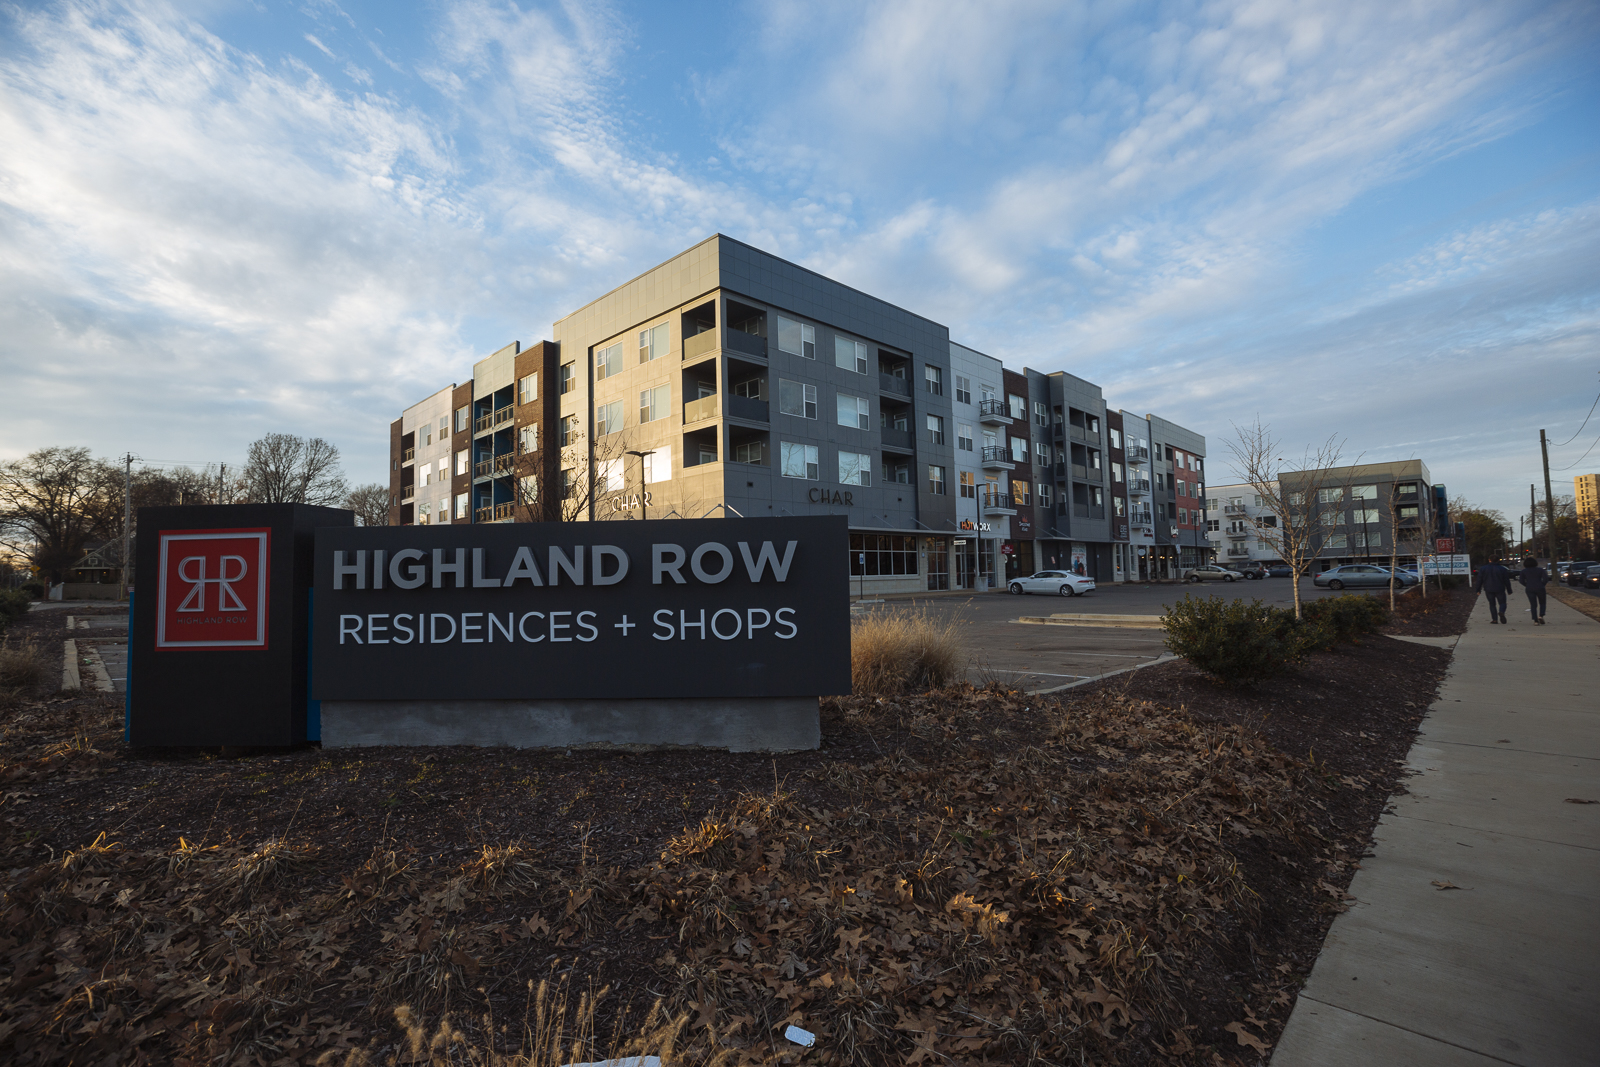 Highland Row is one of the many new mixed-use, high density developments to be built on or near the Highland Strip in the last few years. (Ziggy Mack)